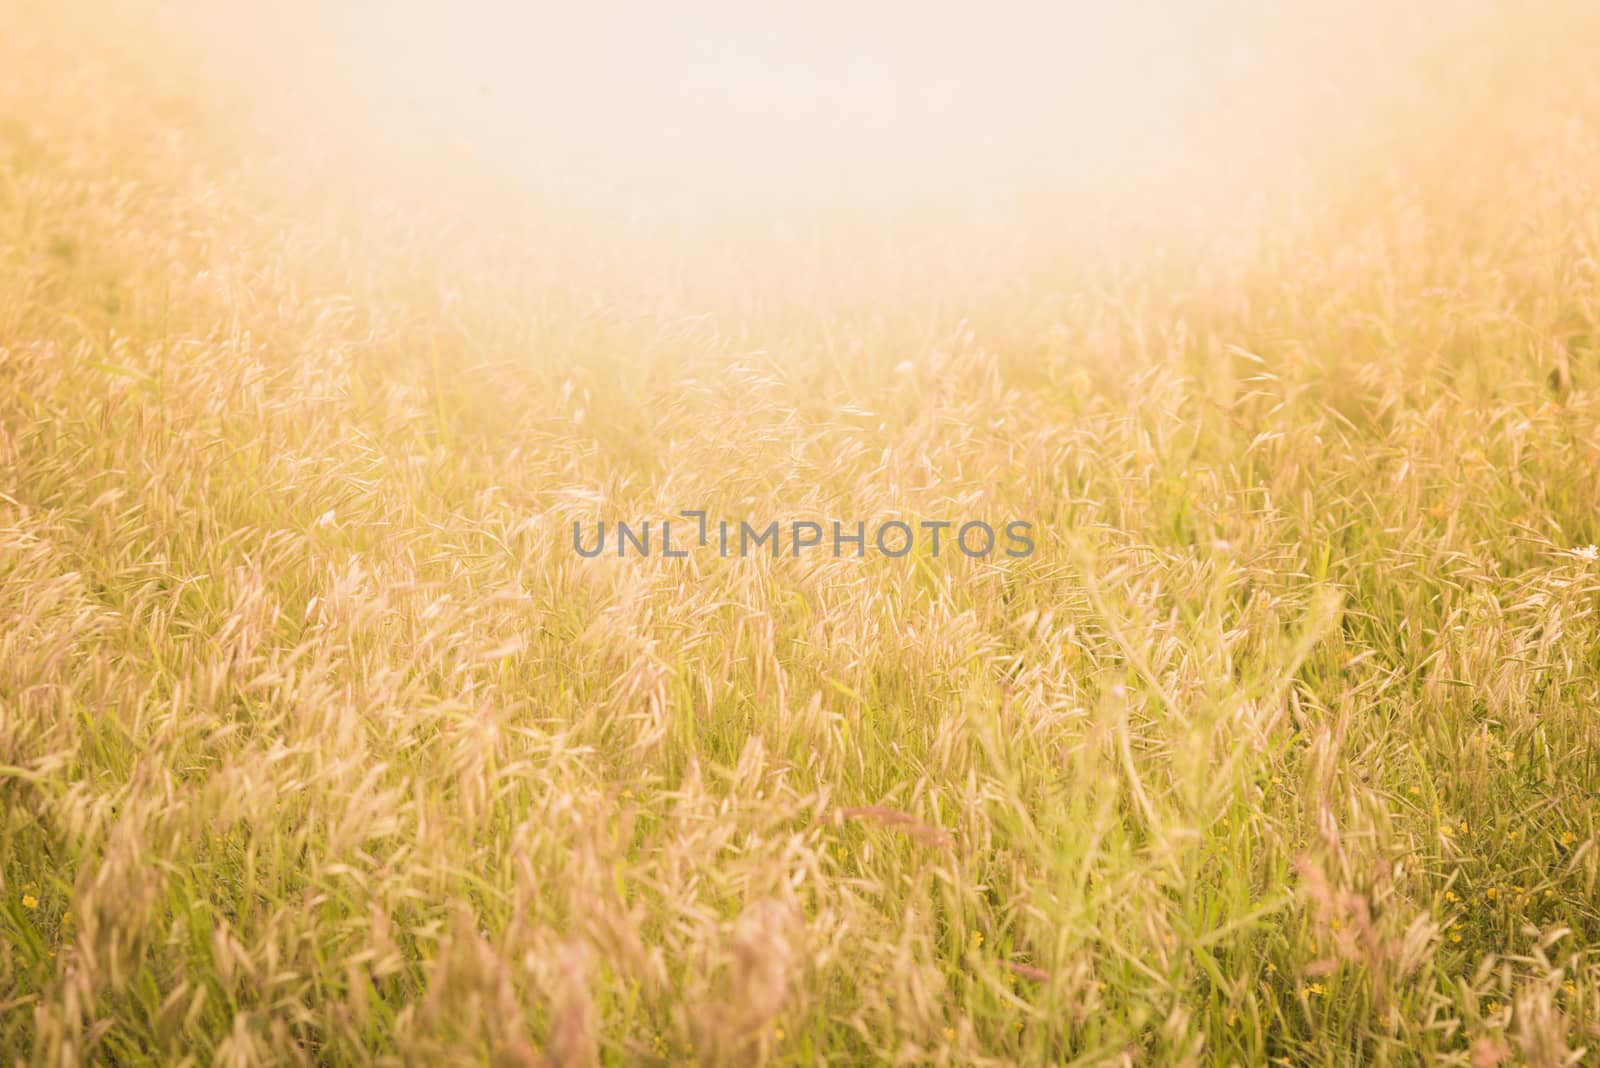 Sunlit field with spikelet